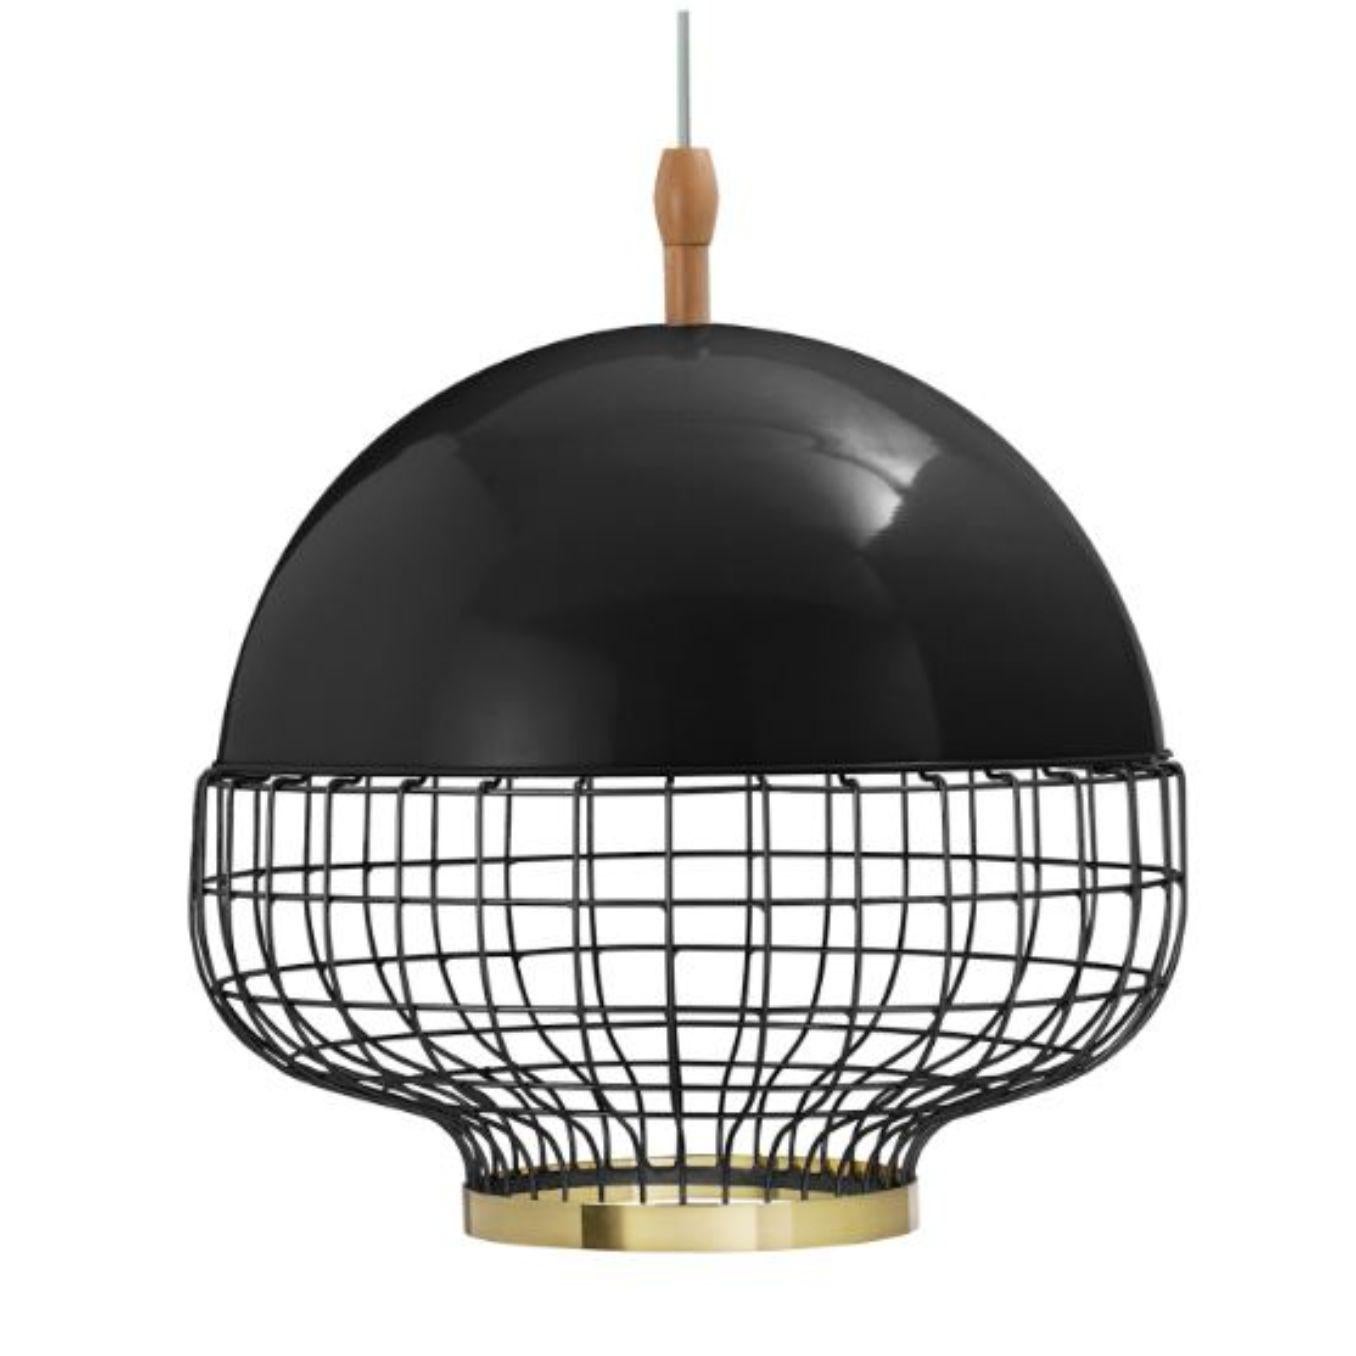 Black magnolia I suspension lamp with brass ring by Dooq.
Dimensions: W 65 x D 65 x H 57 cm.
Materials: lacquered metal, polished or brushed metal, brass.
Also available in different colours and materials. 

Information:
230V/50Hz
E27/1x20W